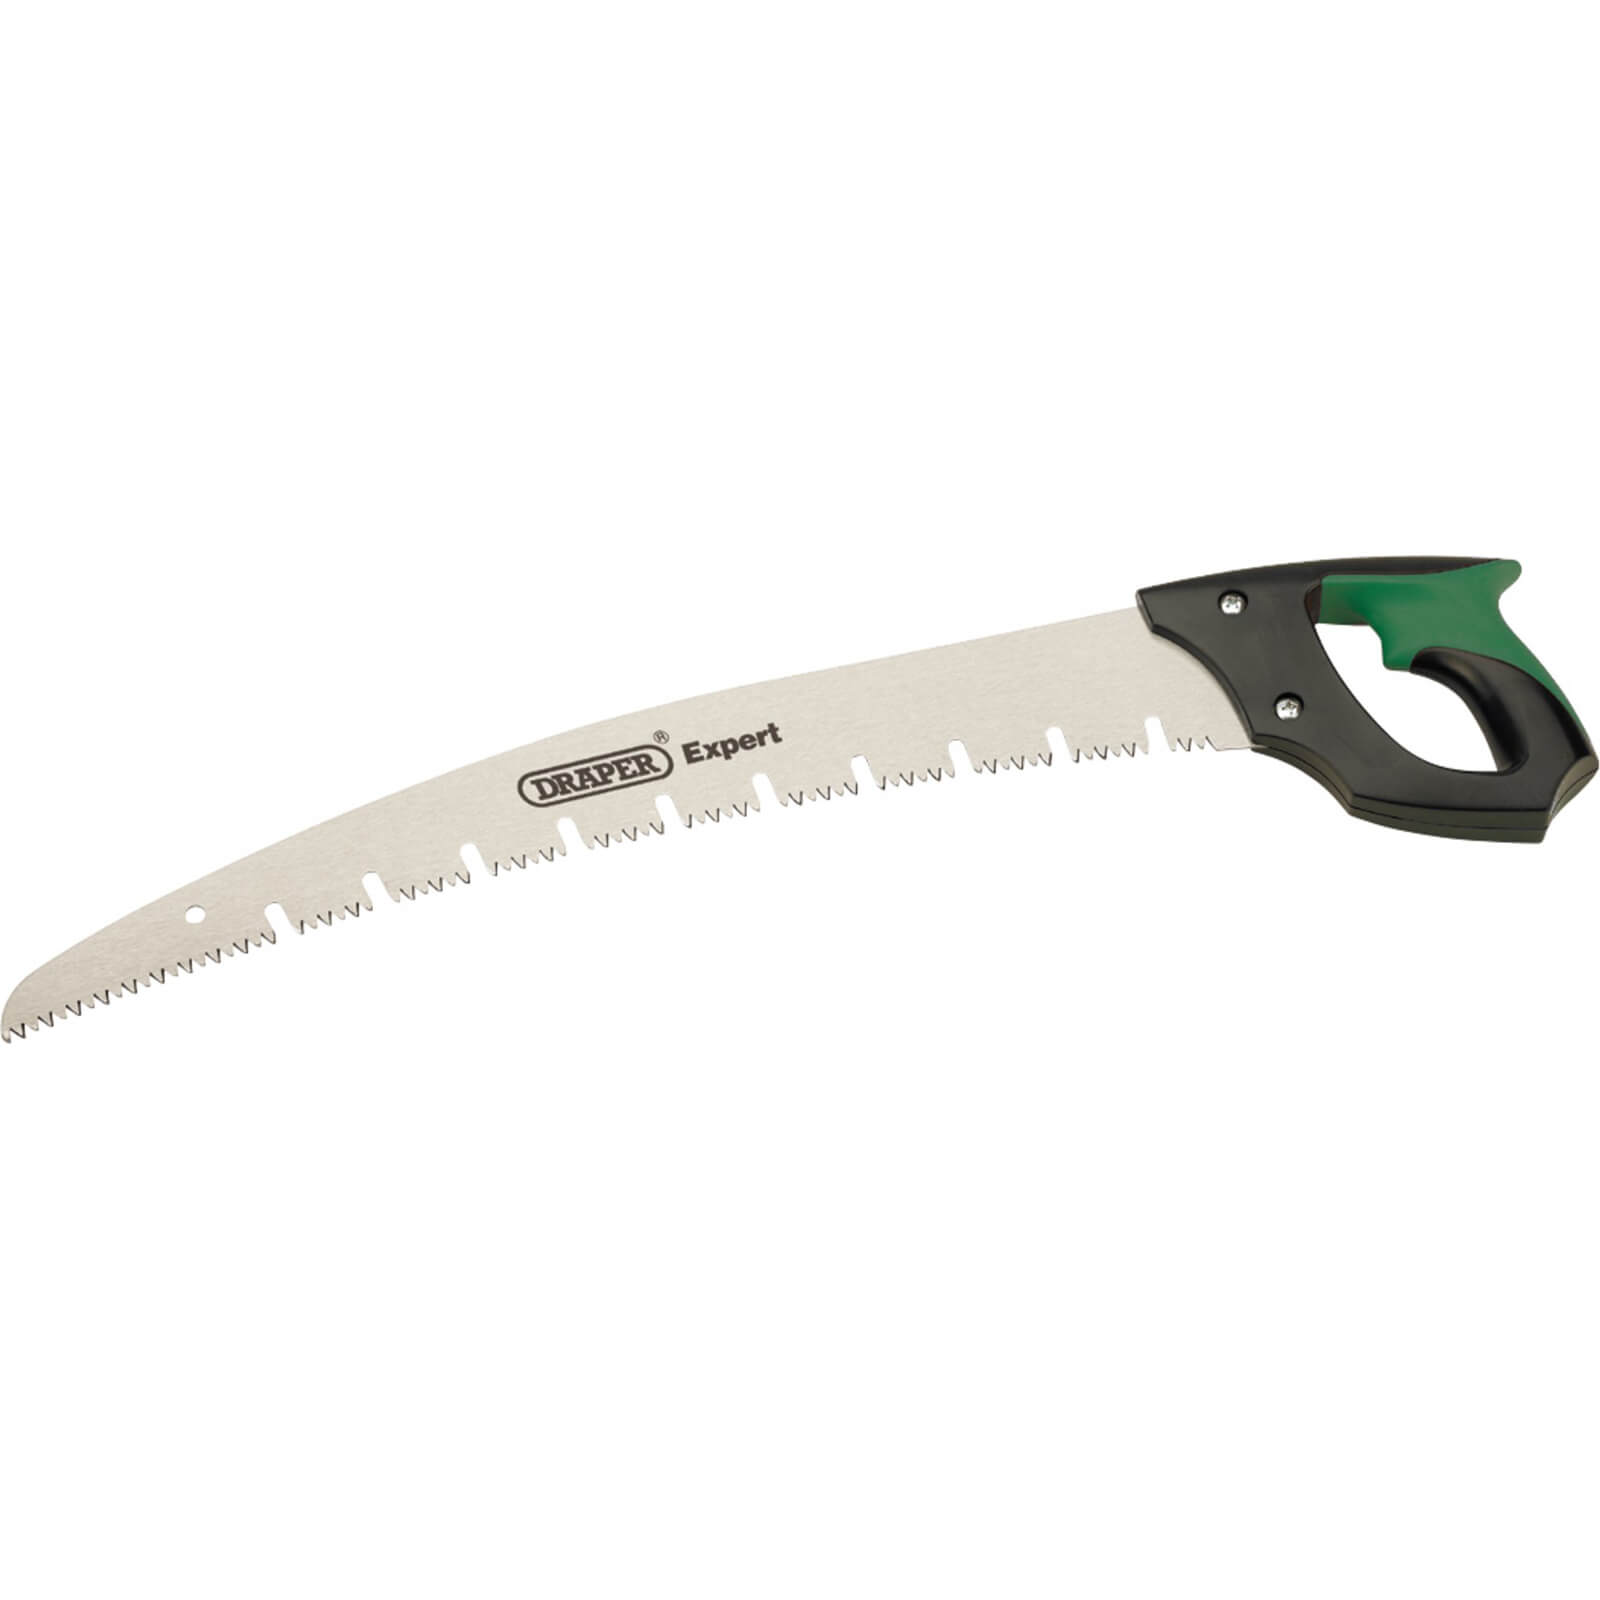 Image of Draper Expert Soft Grip Pruning Saw